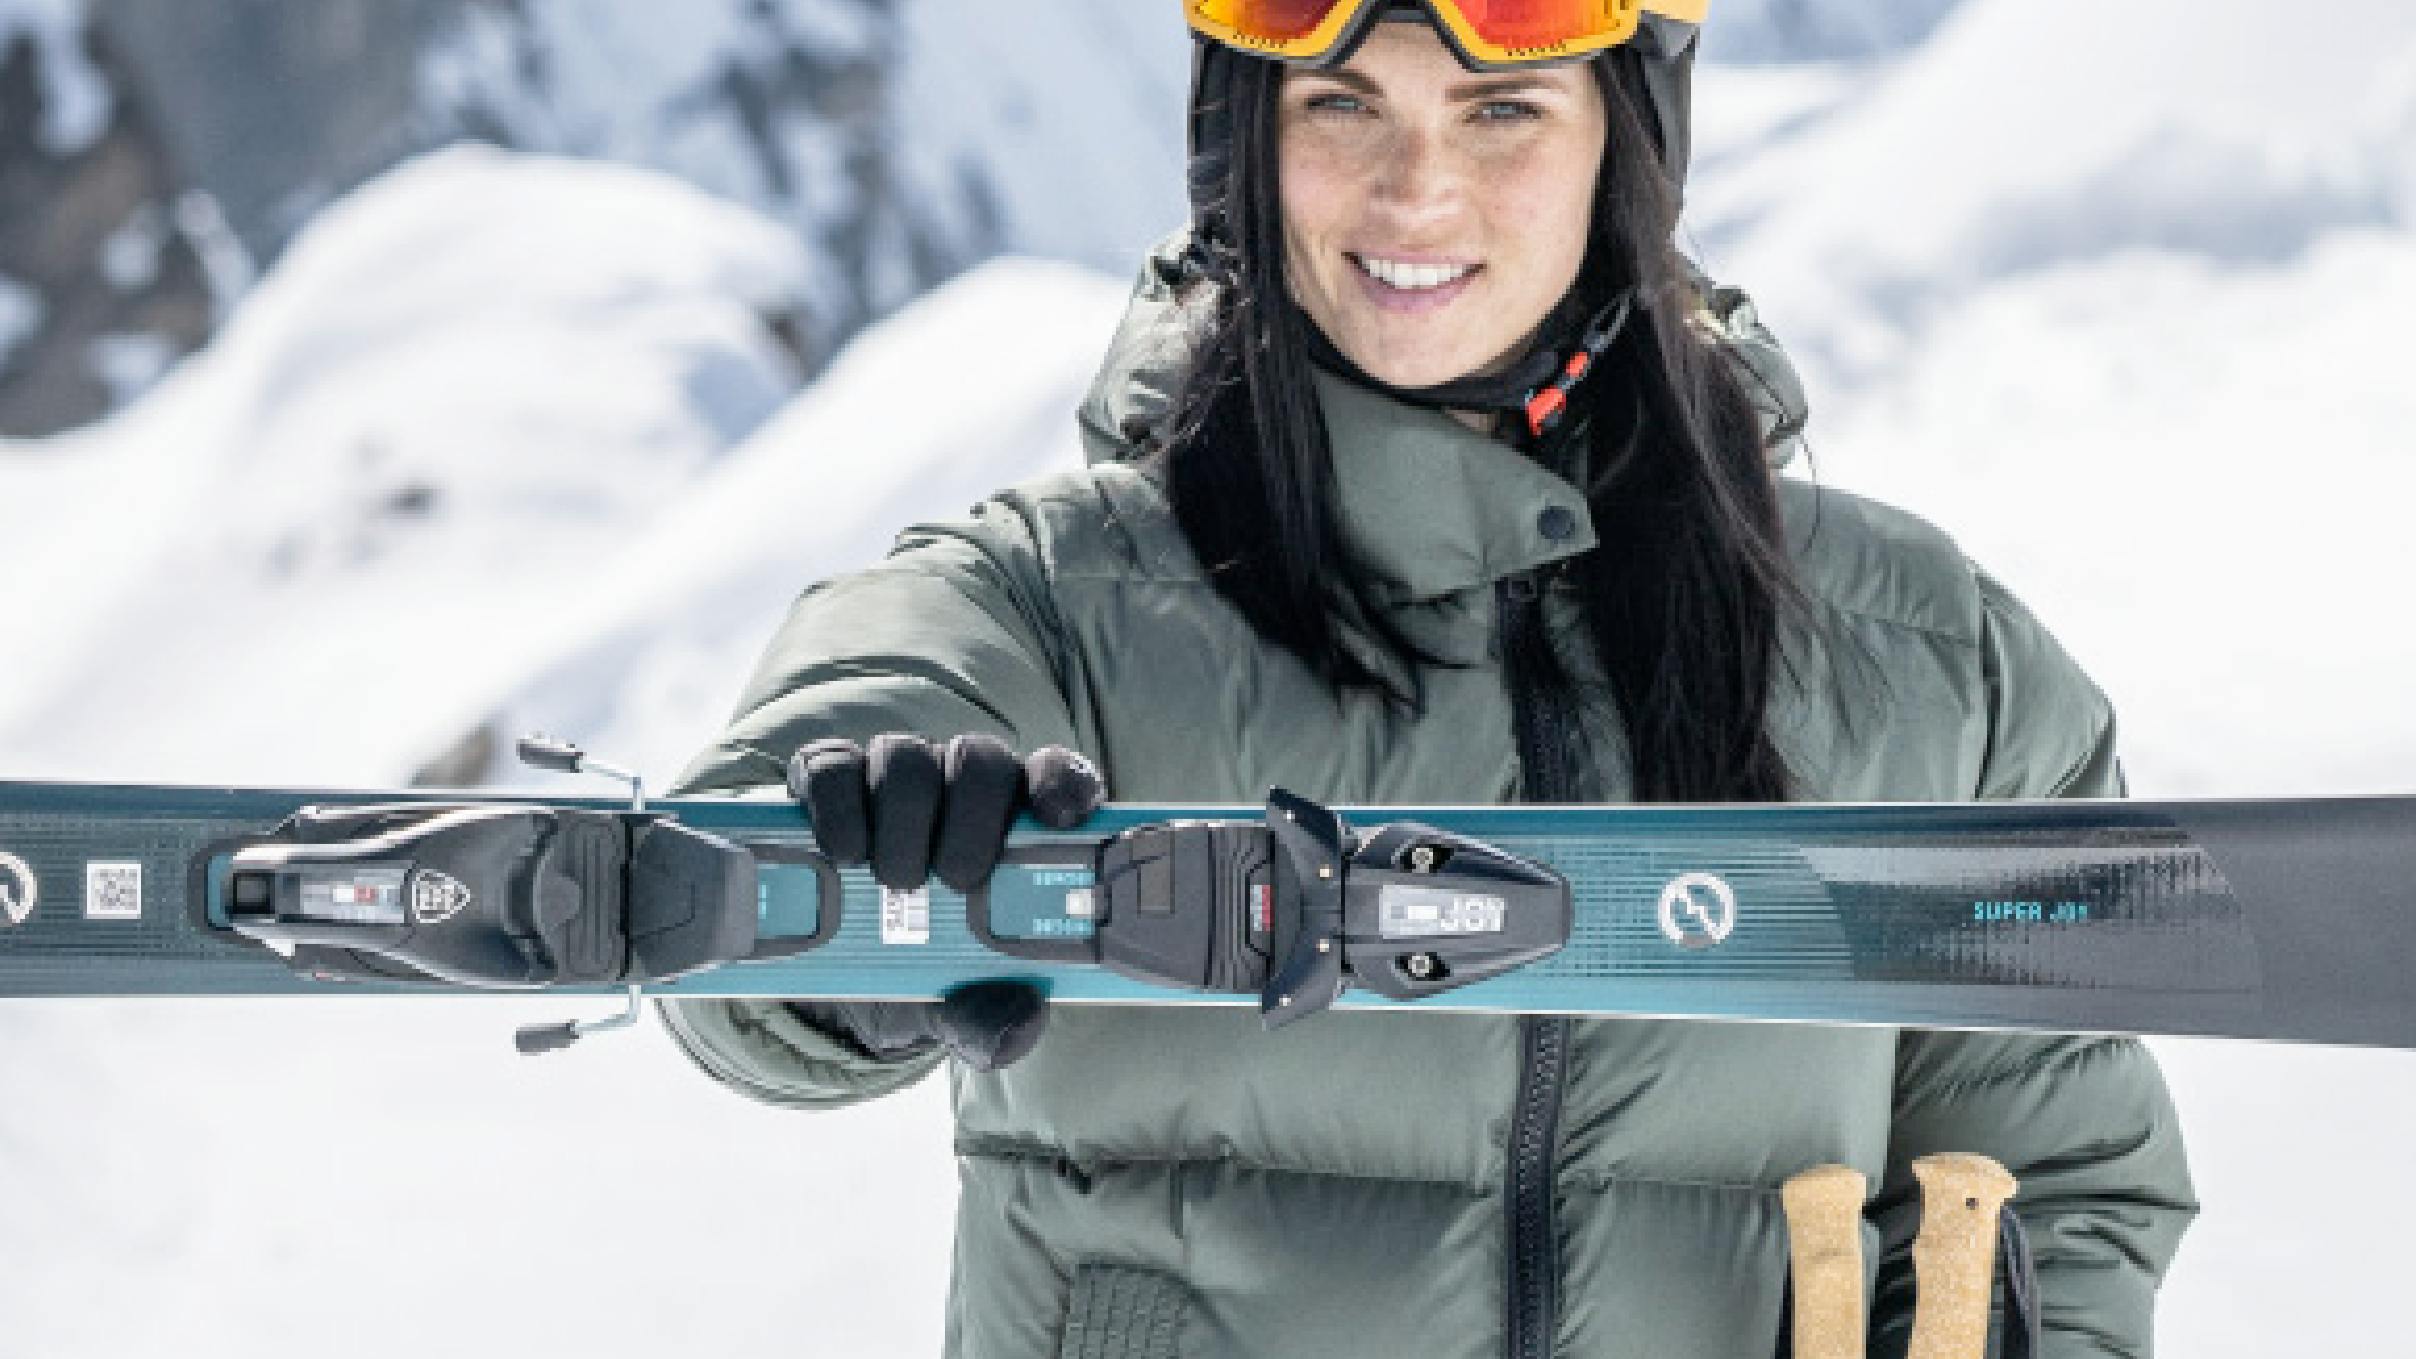 A skier holding out a ski with a Tyrolia binding mounted to it. 